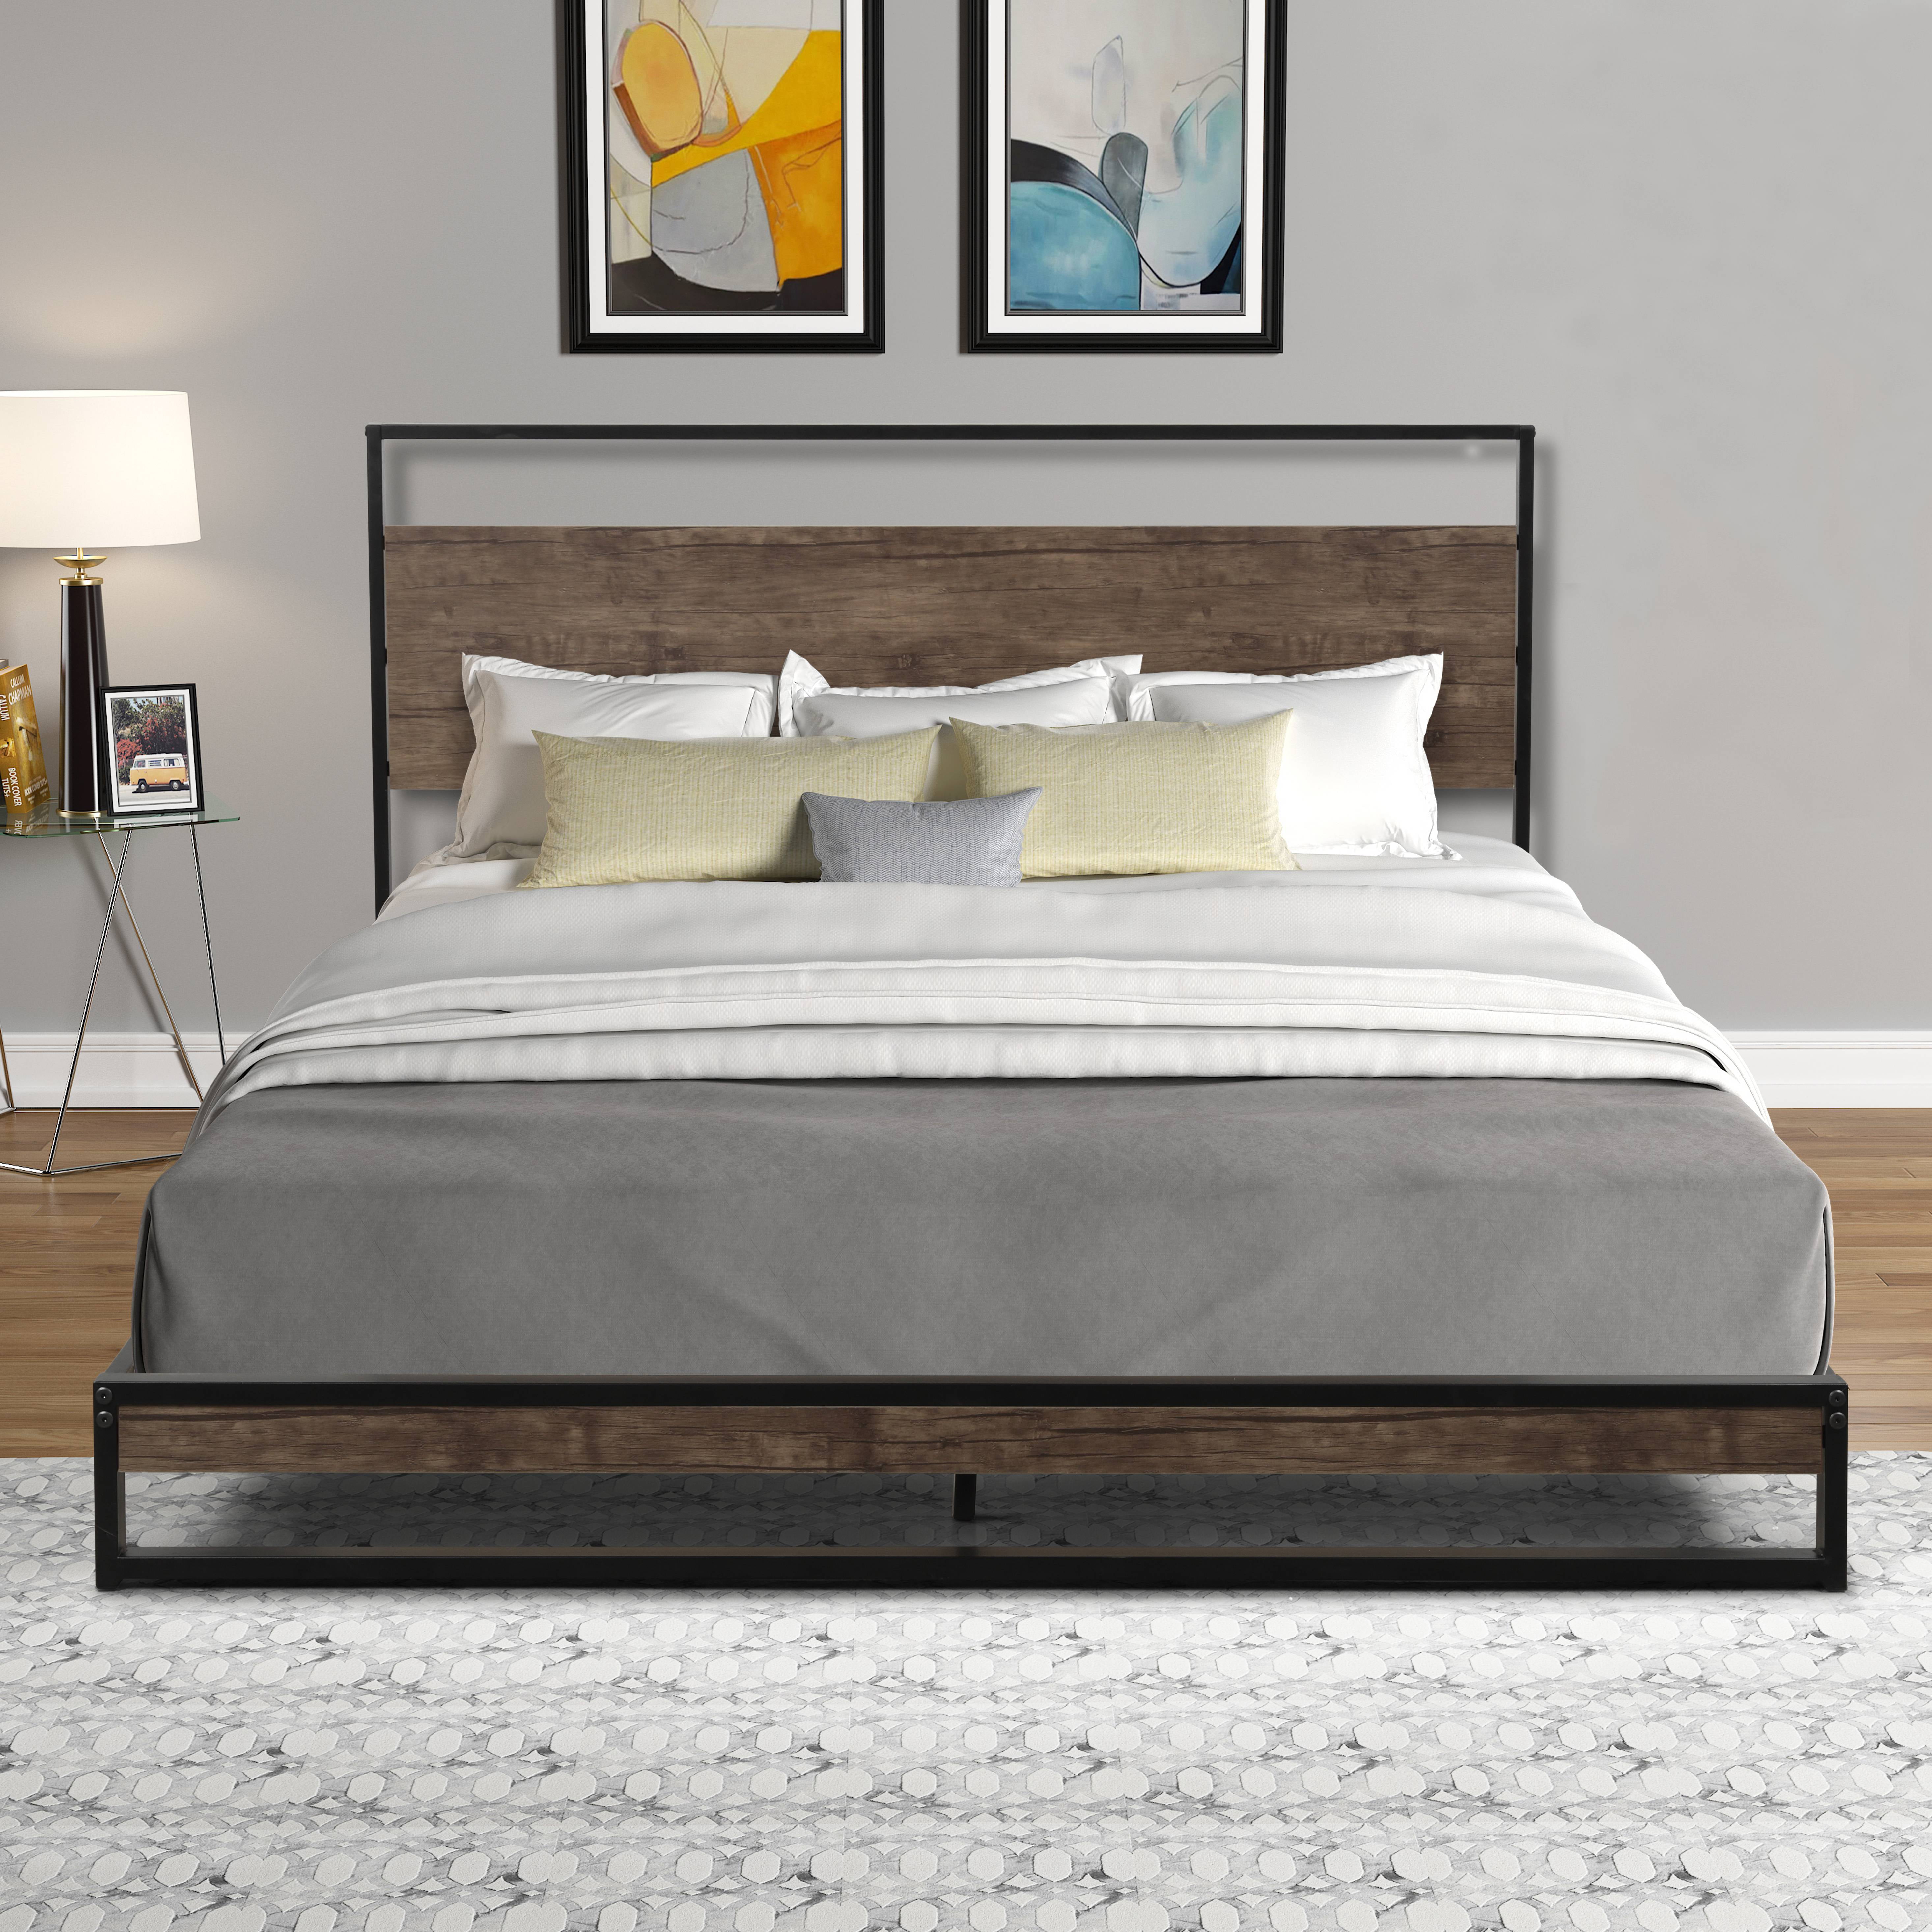 Queen Size Bed Frame Modern Industrial, Simple Modern Queen Bed Frame